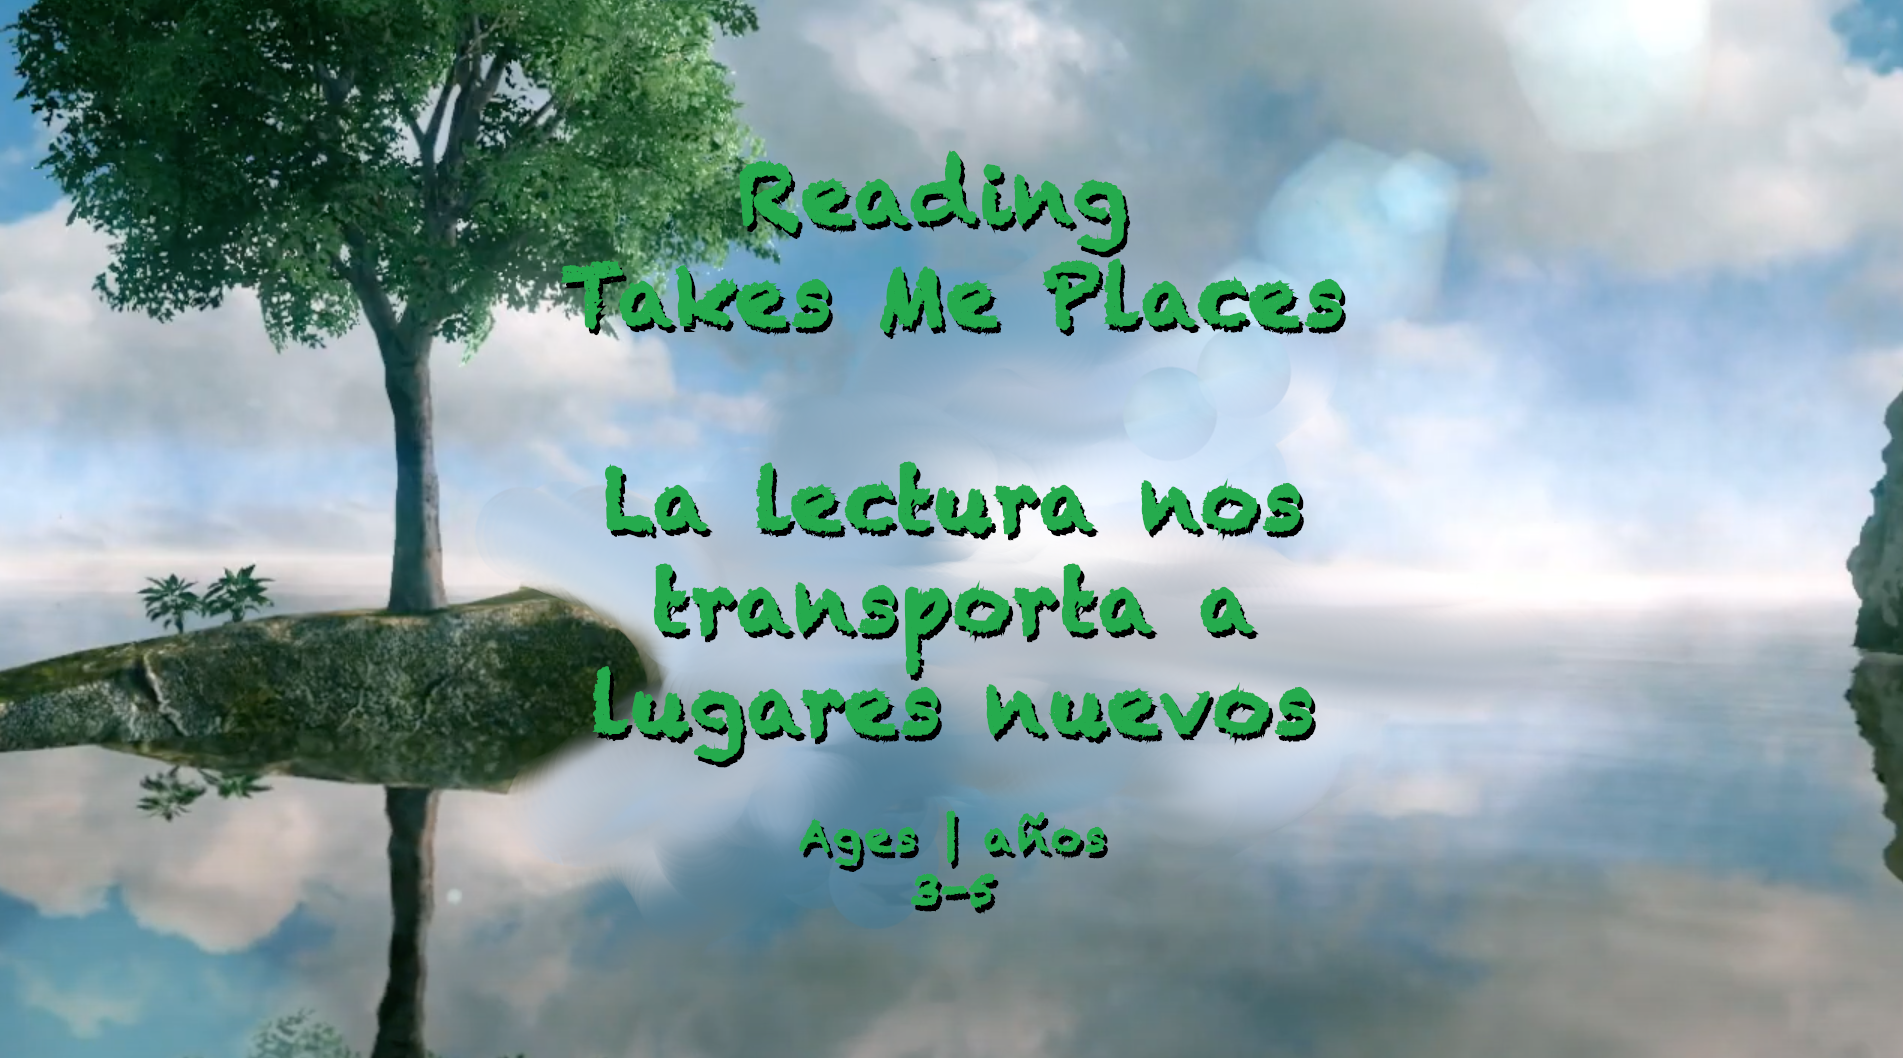 Reading Takes Me Places for 3-5 year olds